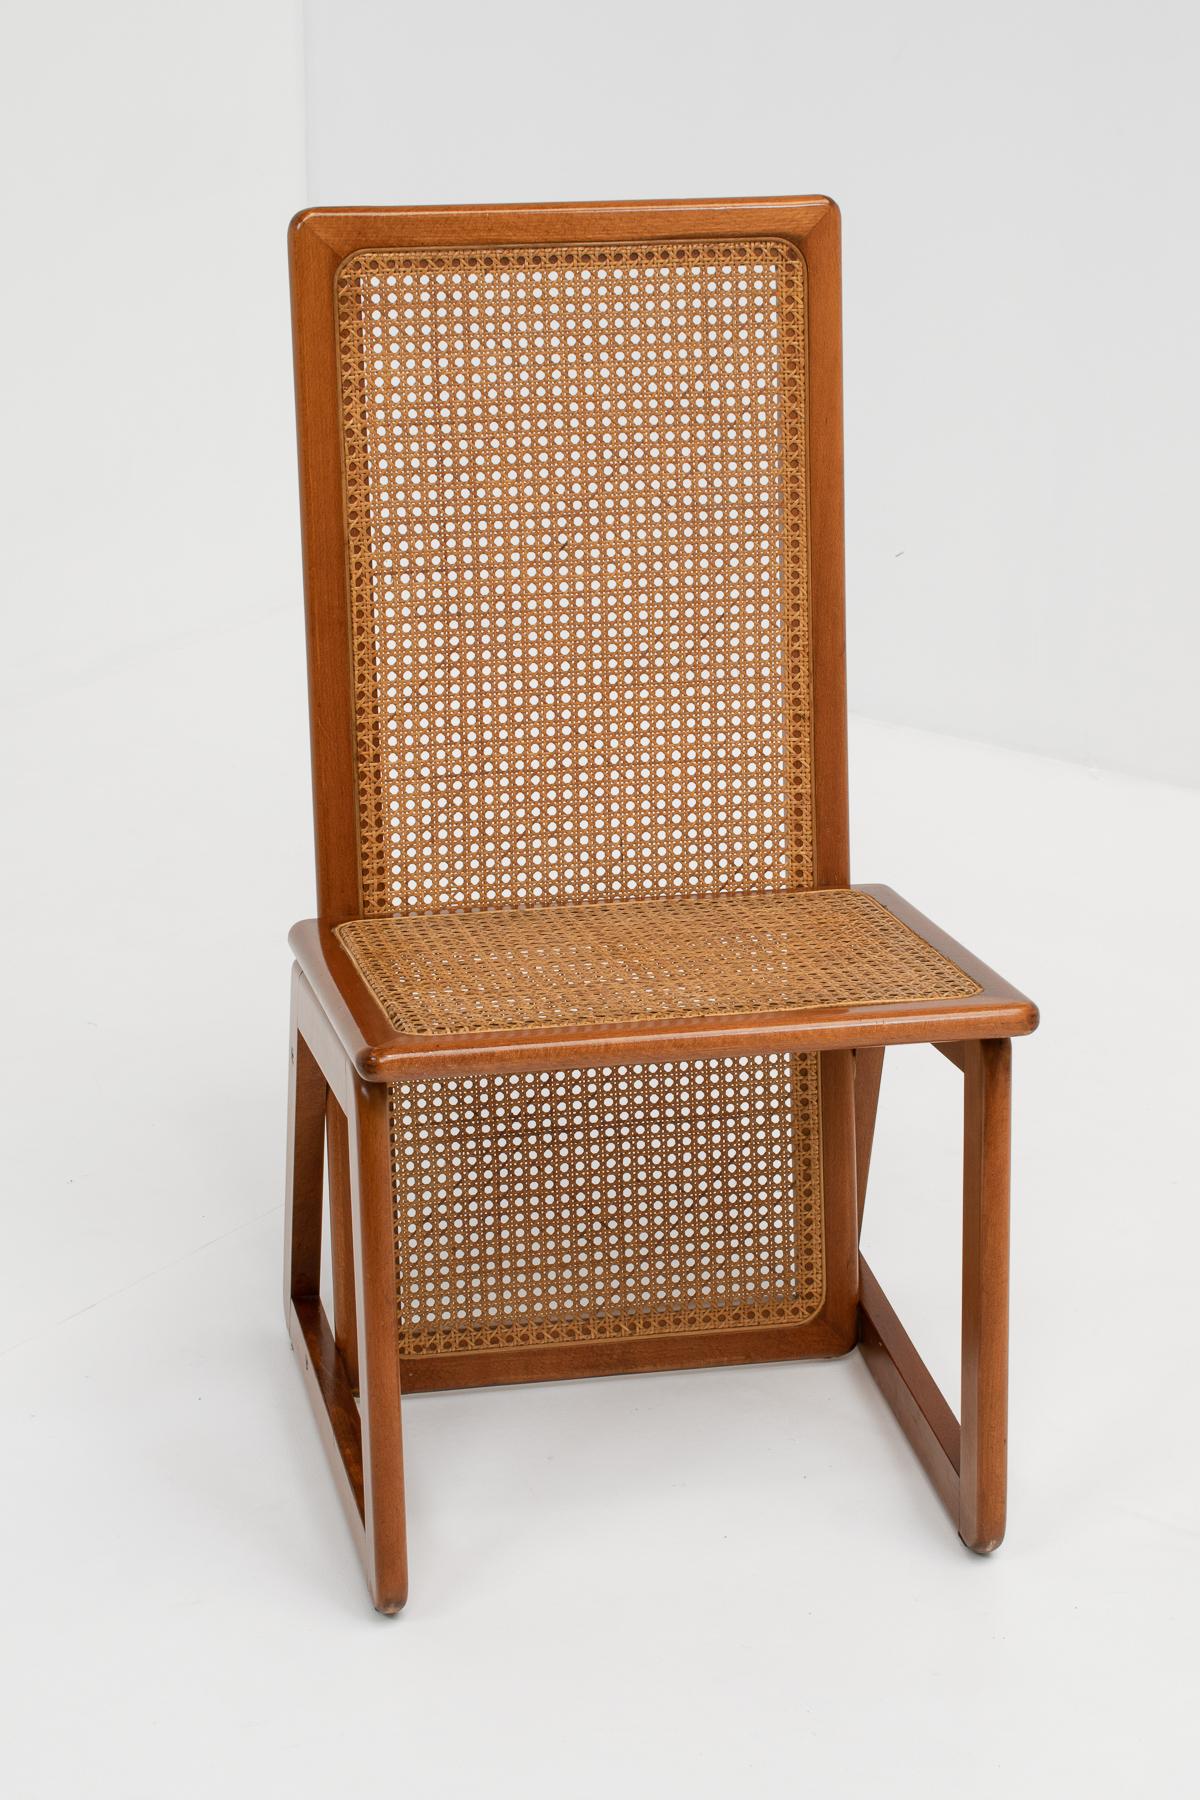 Set of 4 Italian High-Back Dining Chairs in Wood & Cane, 1970s For Sale 1